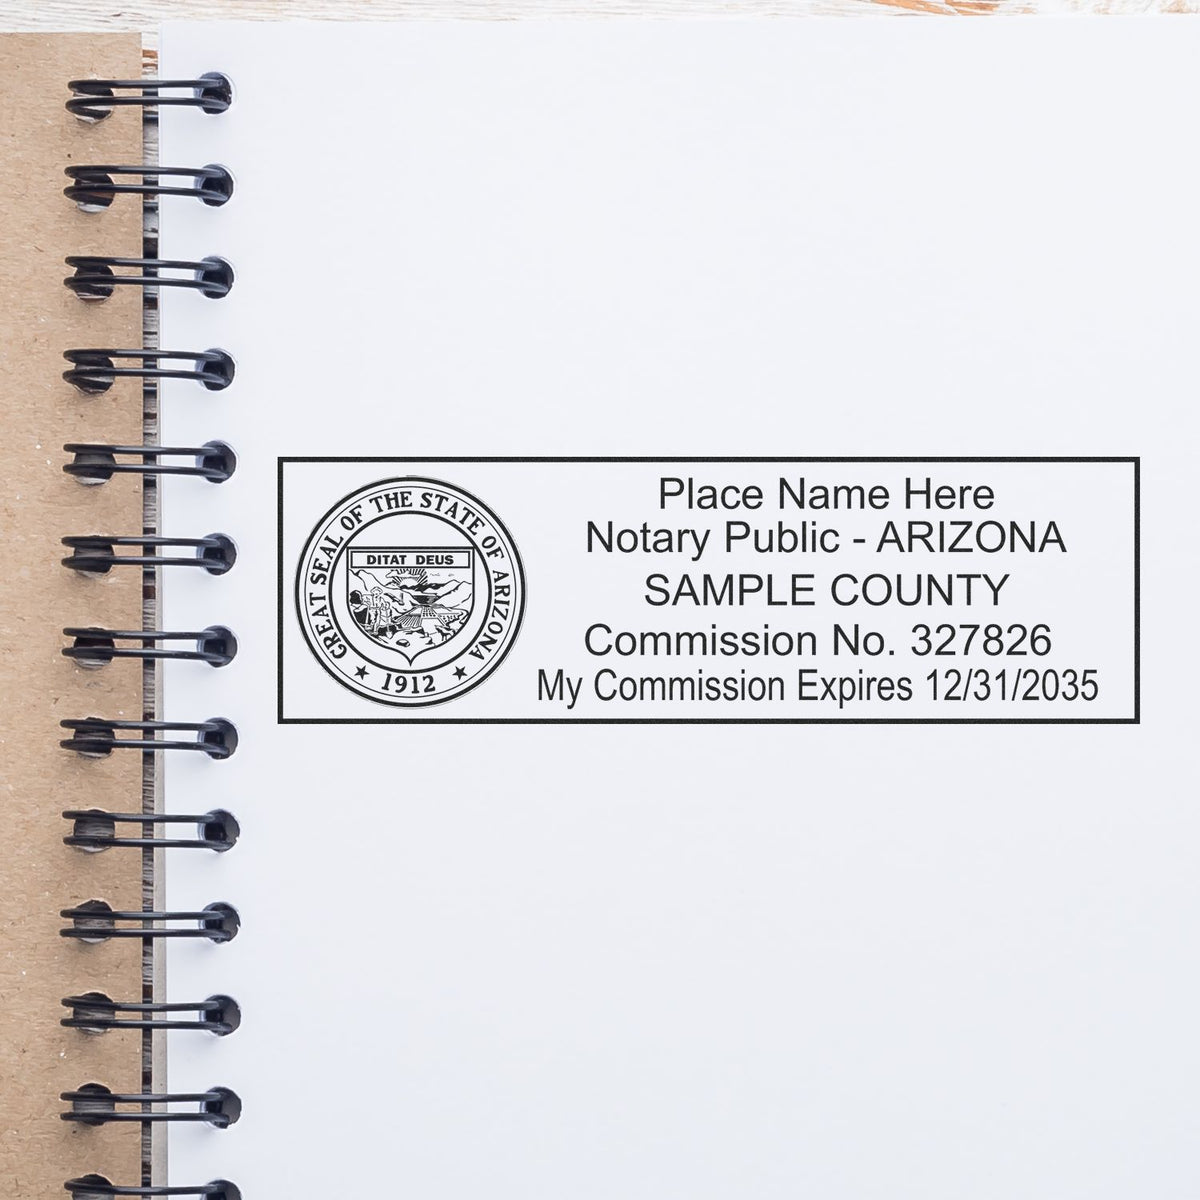 An alternative view of the PSI Arizona Notary Stamp stamped on a sheet of paper showing the image in use